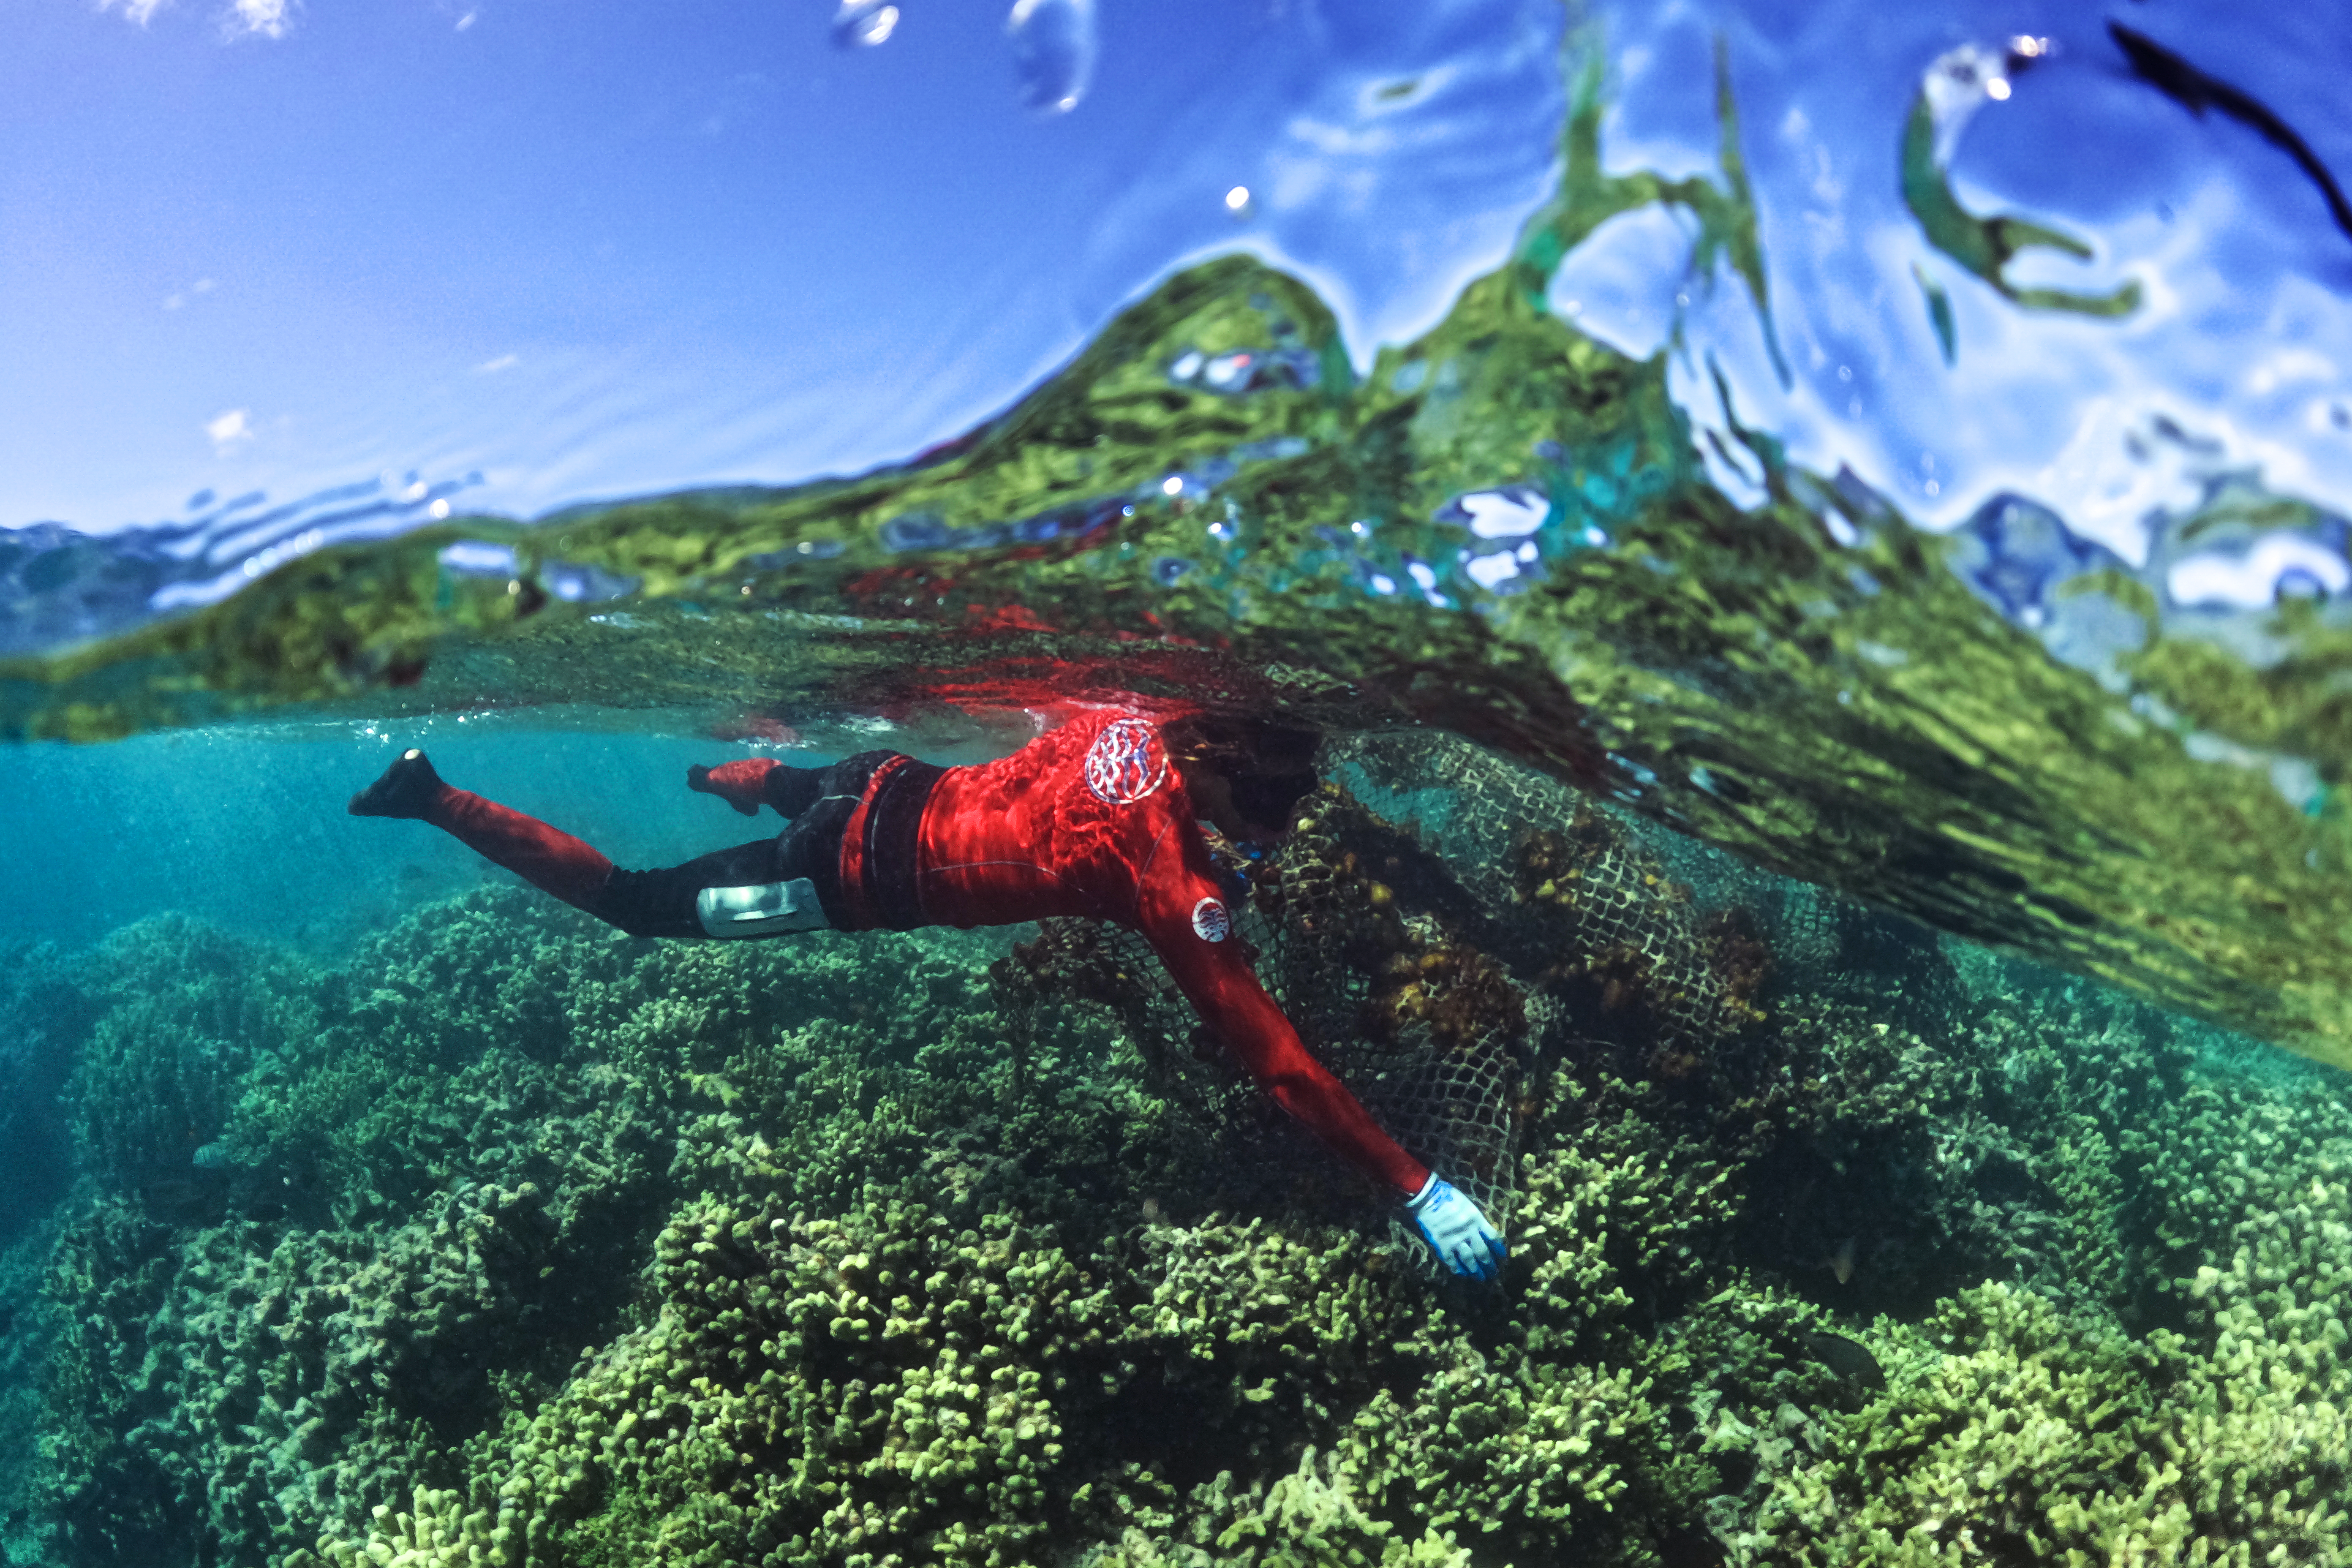 Above and under the water shot of snorkeler removing derelict fishing net from coral reef.